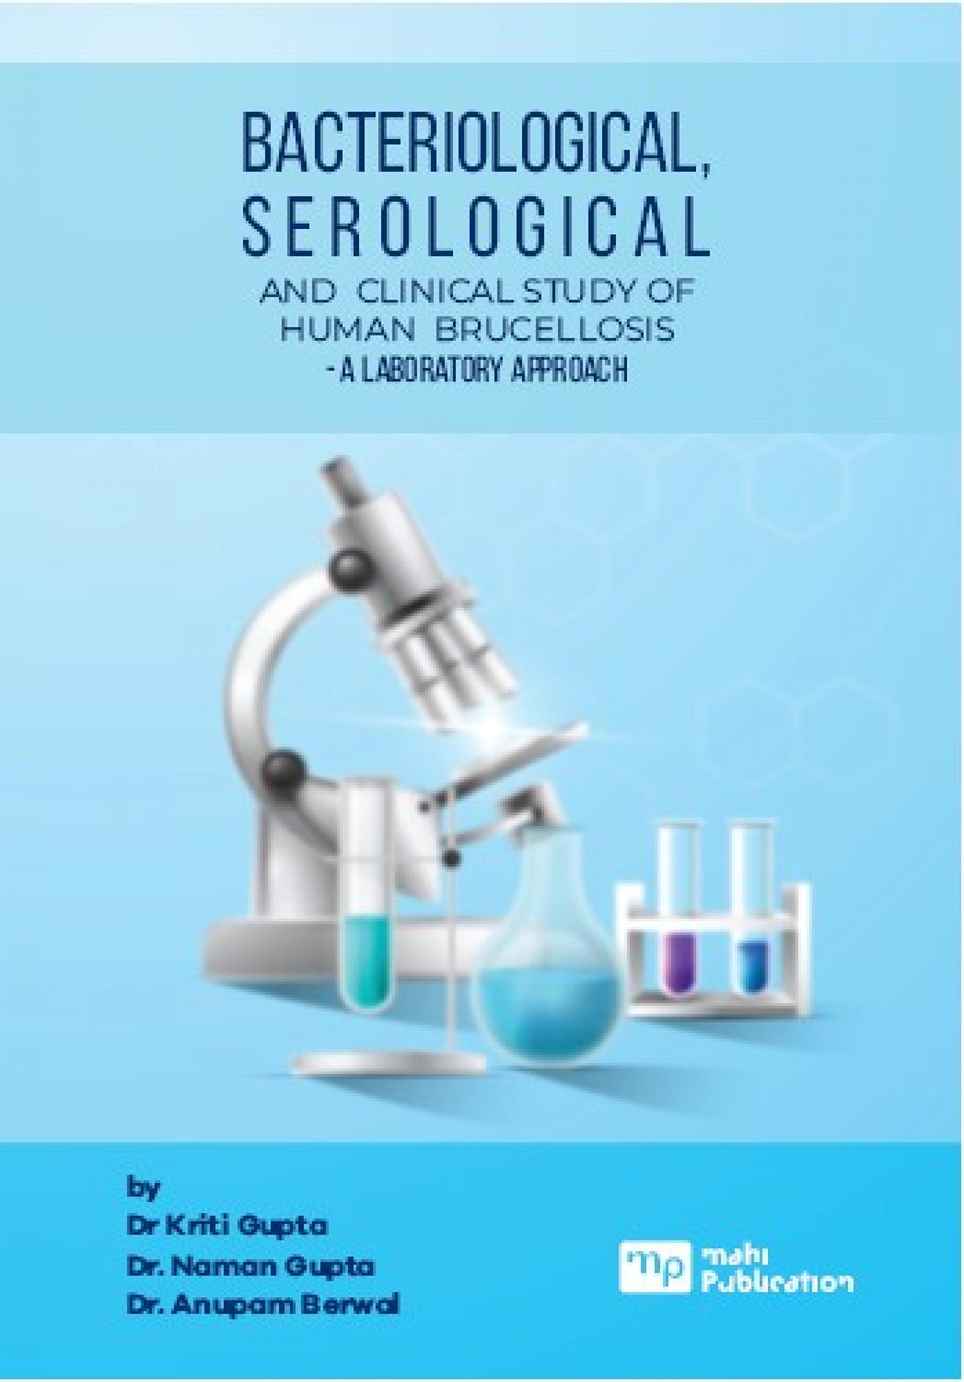  Bacteriological, Serological And Clinical Study Of Human Brucellosisa Laboratory Approach